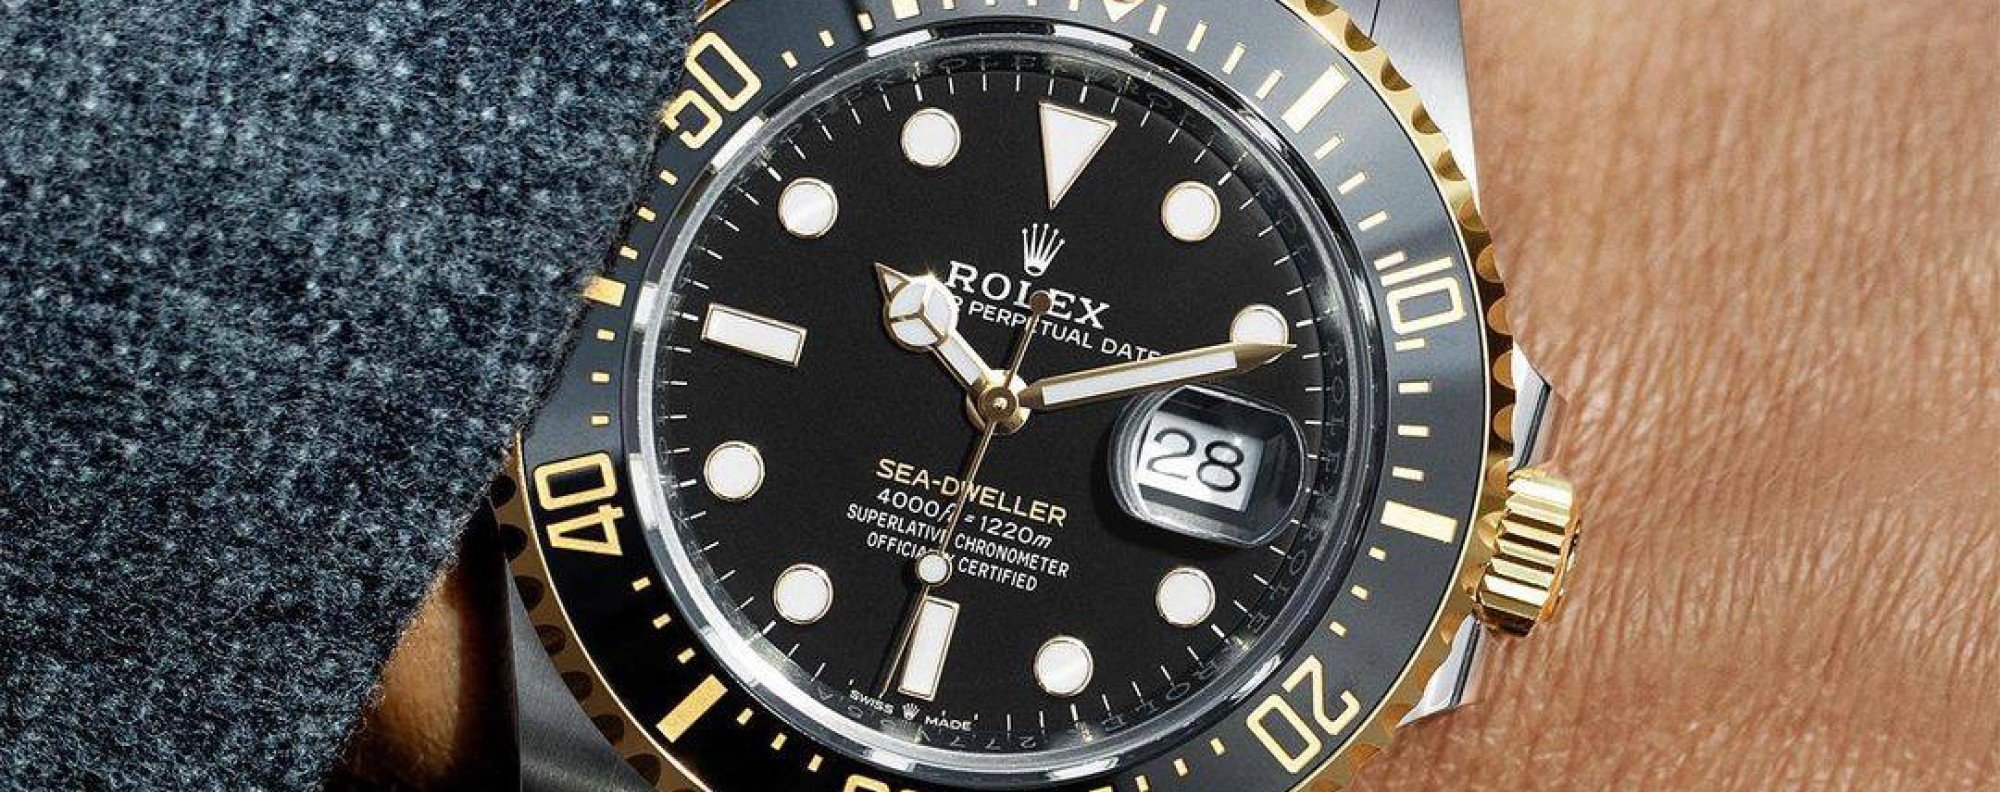 fire gange halvleder alliance Want to buy a Rolex watch online? 6 of the best places you can trust for  both new and pre-owned watches | South China Morning Post